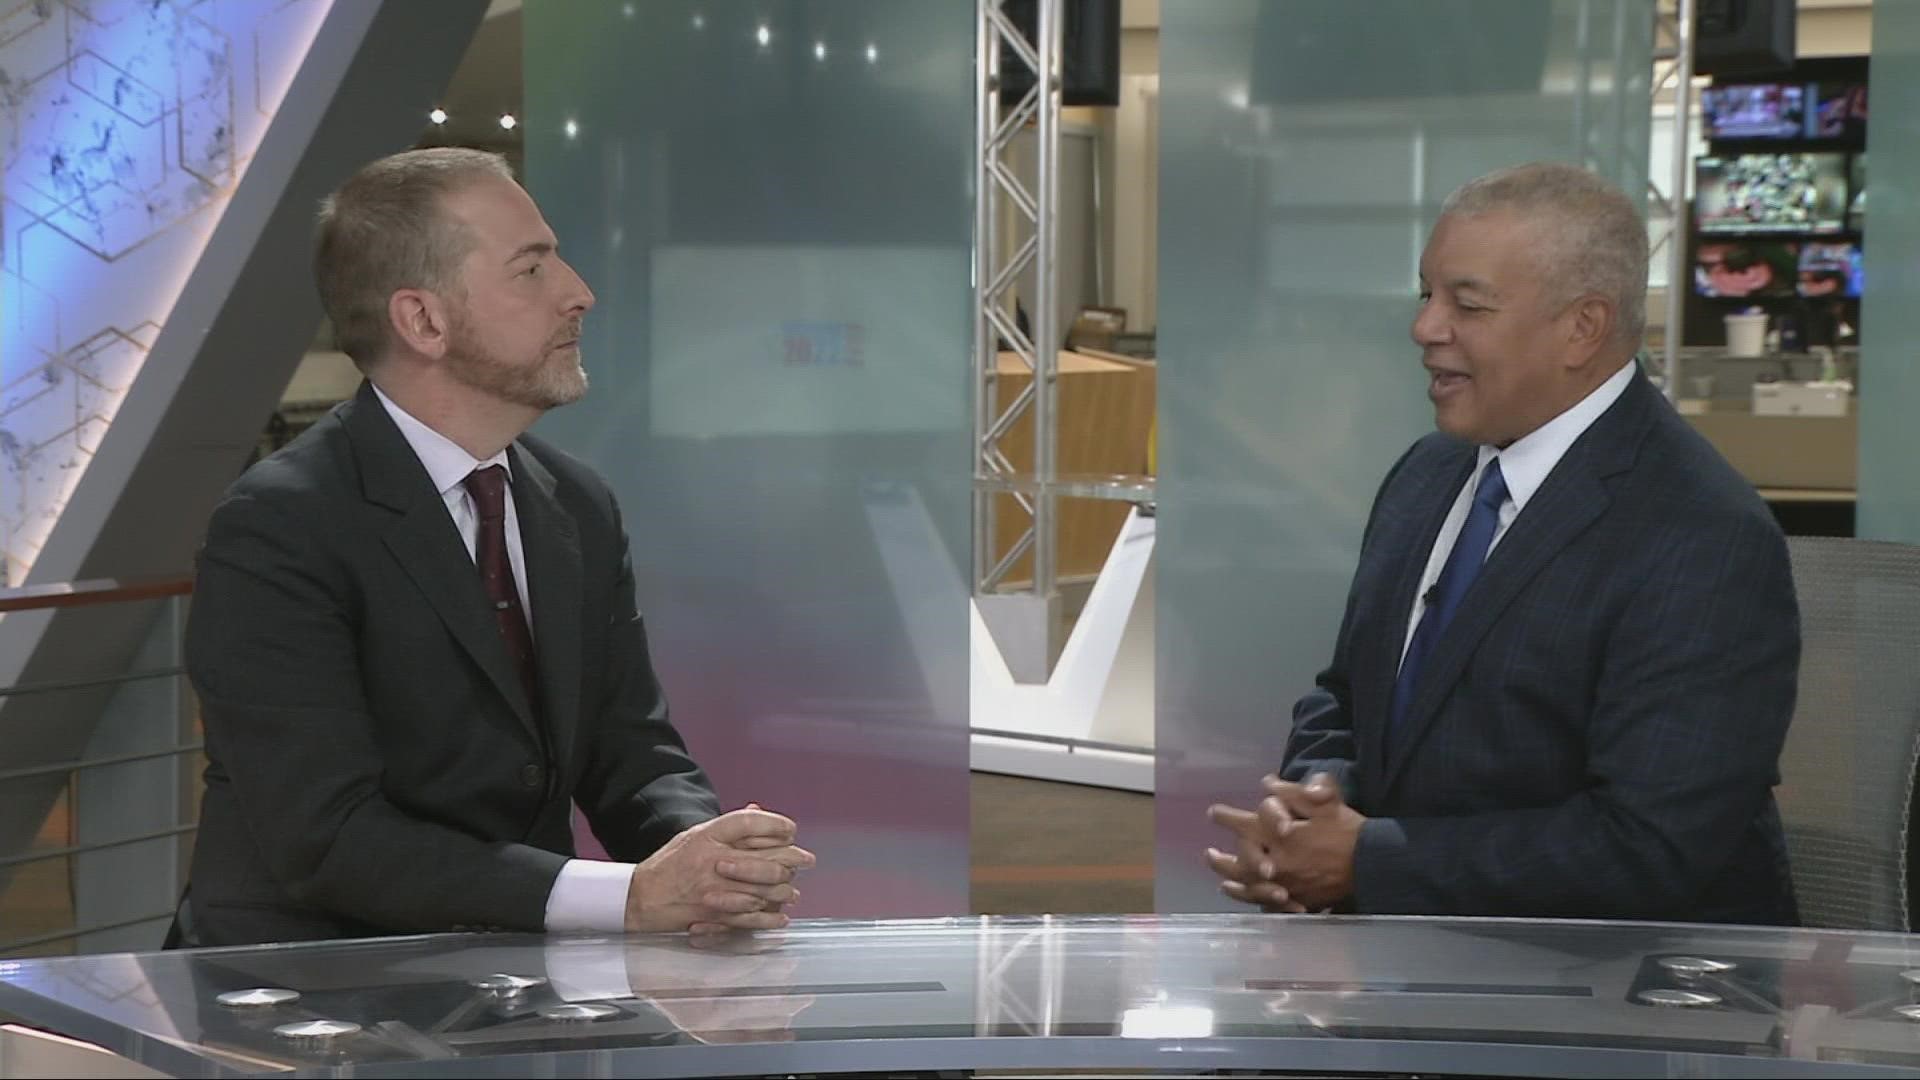 Russ Mitchell talked with Chuck Todd on Monday to discuss Ohio and National politics.